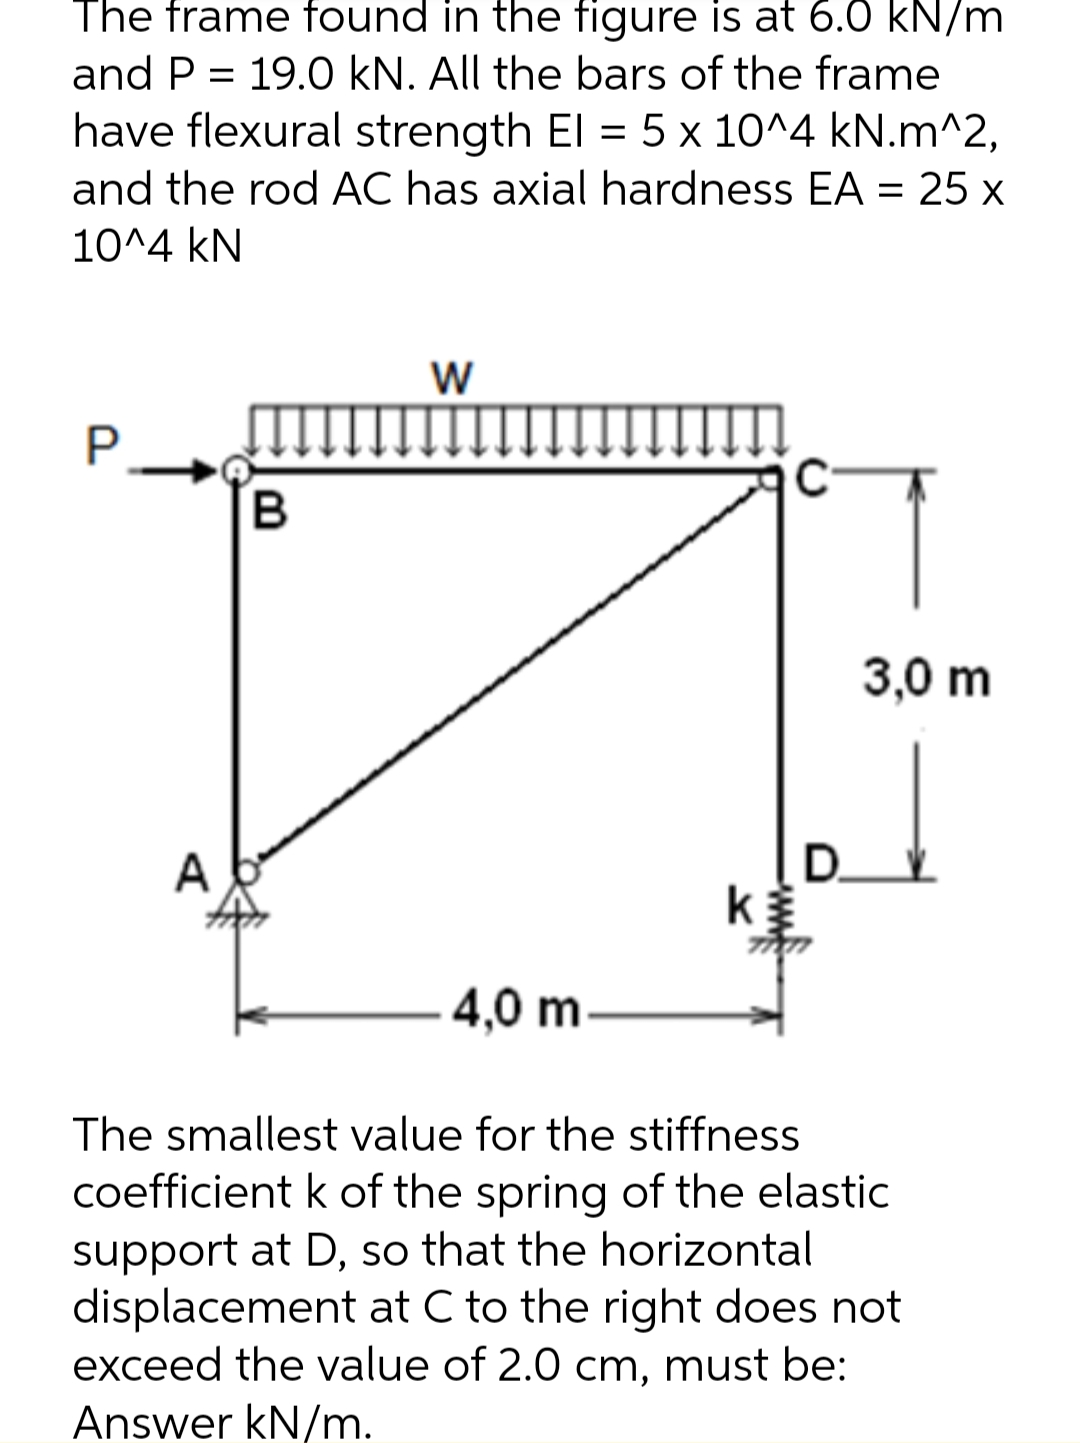 The frame found in the figure is at 6.0 kN/m
and P = 19.0 kN. All the bars of the frame
have flexural strength El = 5 x 10^4 kN.m^2,
and the rod AC has axial hardness EA = 25 x
10^4 kN
W
P
C
3,0 m
A
D.
k
4,0 m
The smallest value for the stiffness
coefficient k of the spring of the elastic
support at D, so that the horizontal
displacement at C to the right does not
exceed the value of 2.0 cm, must be:
Answer kN/m.
